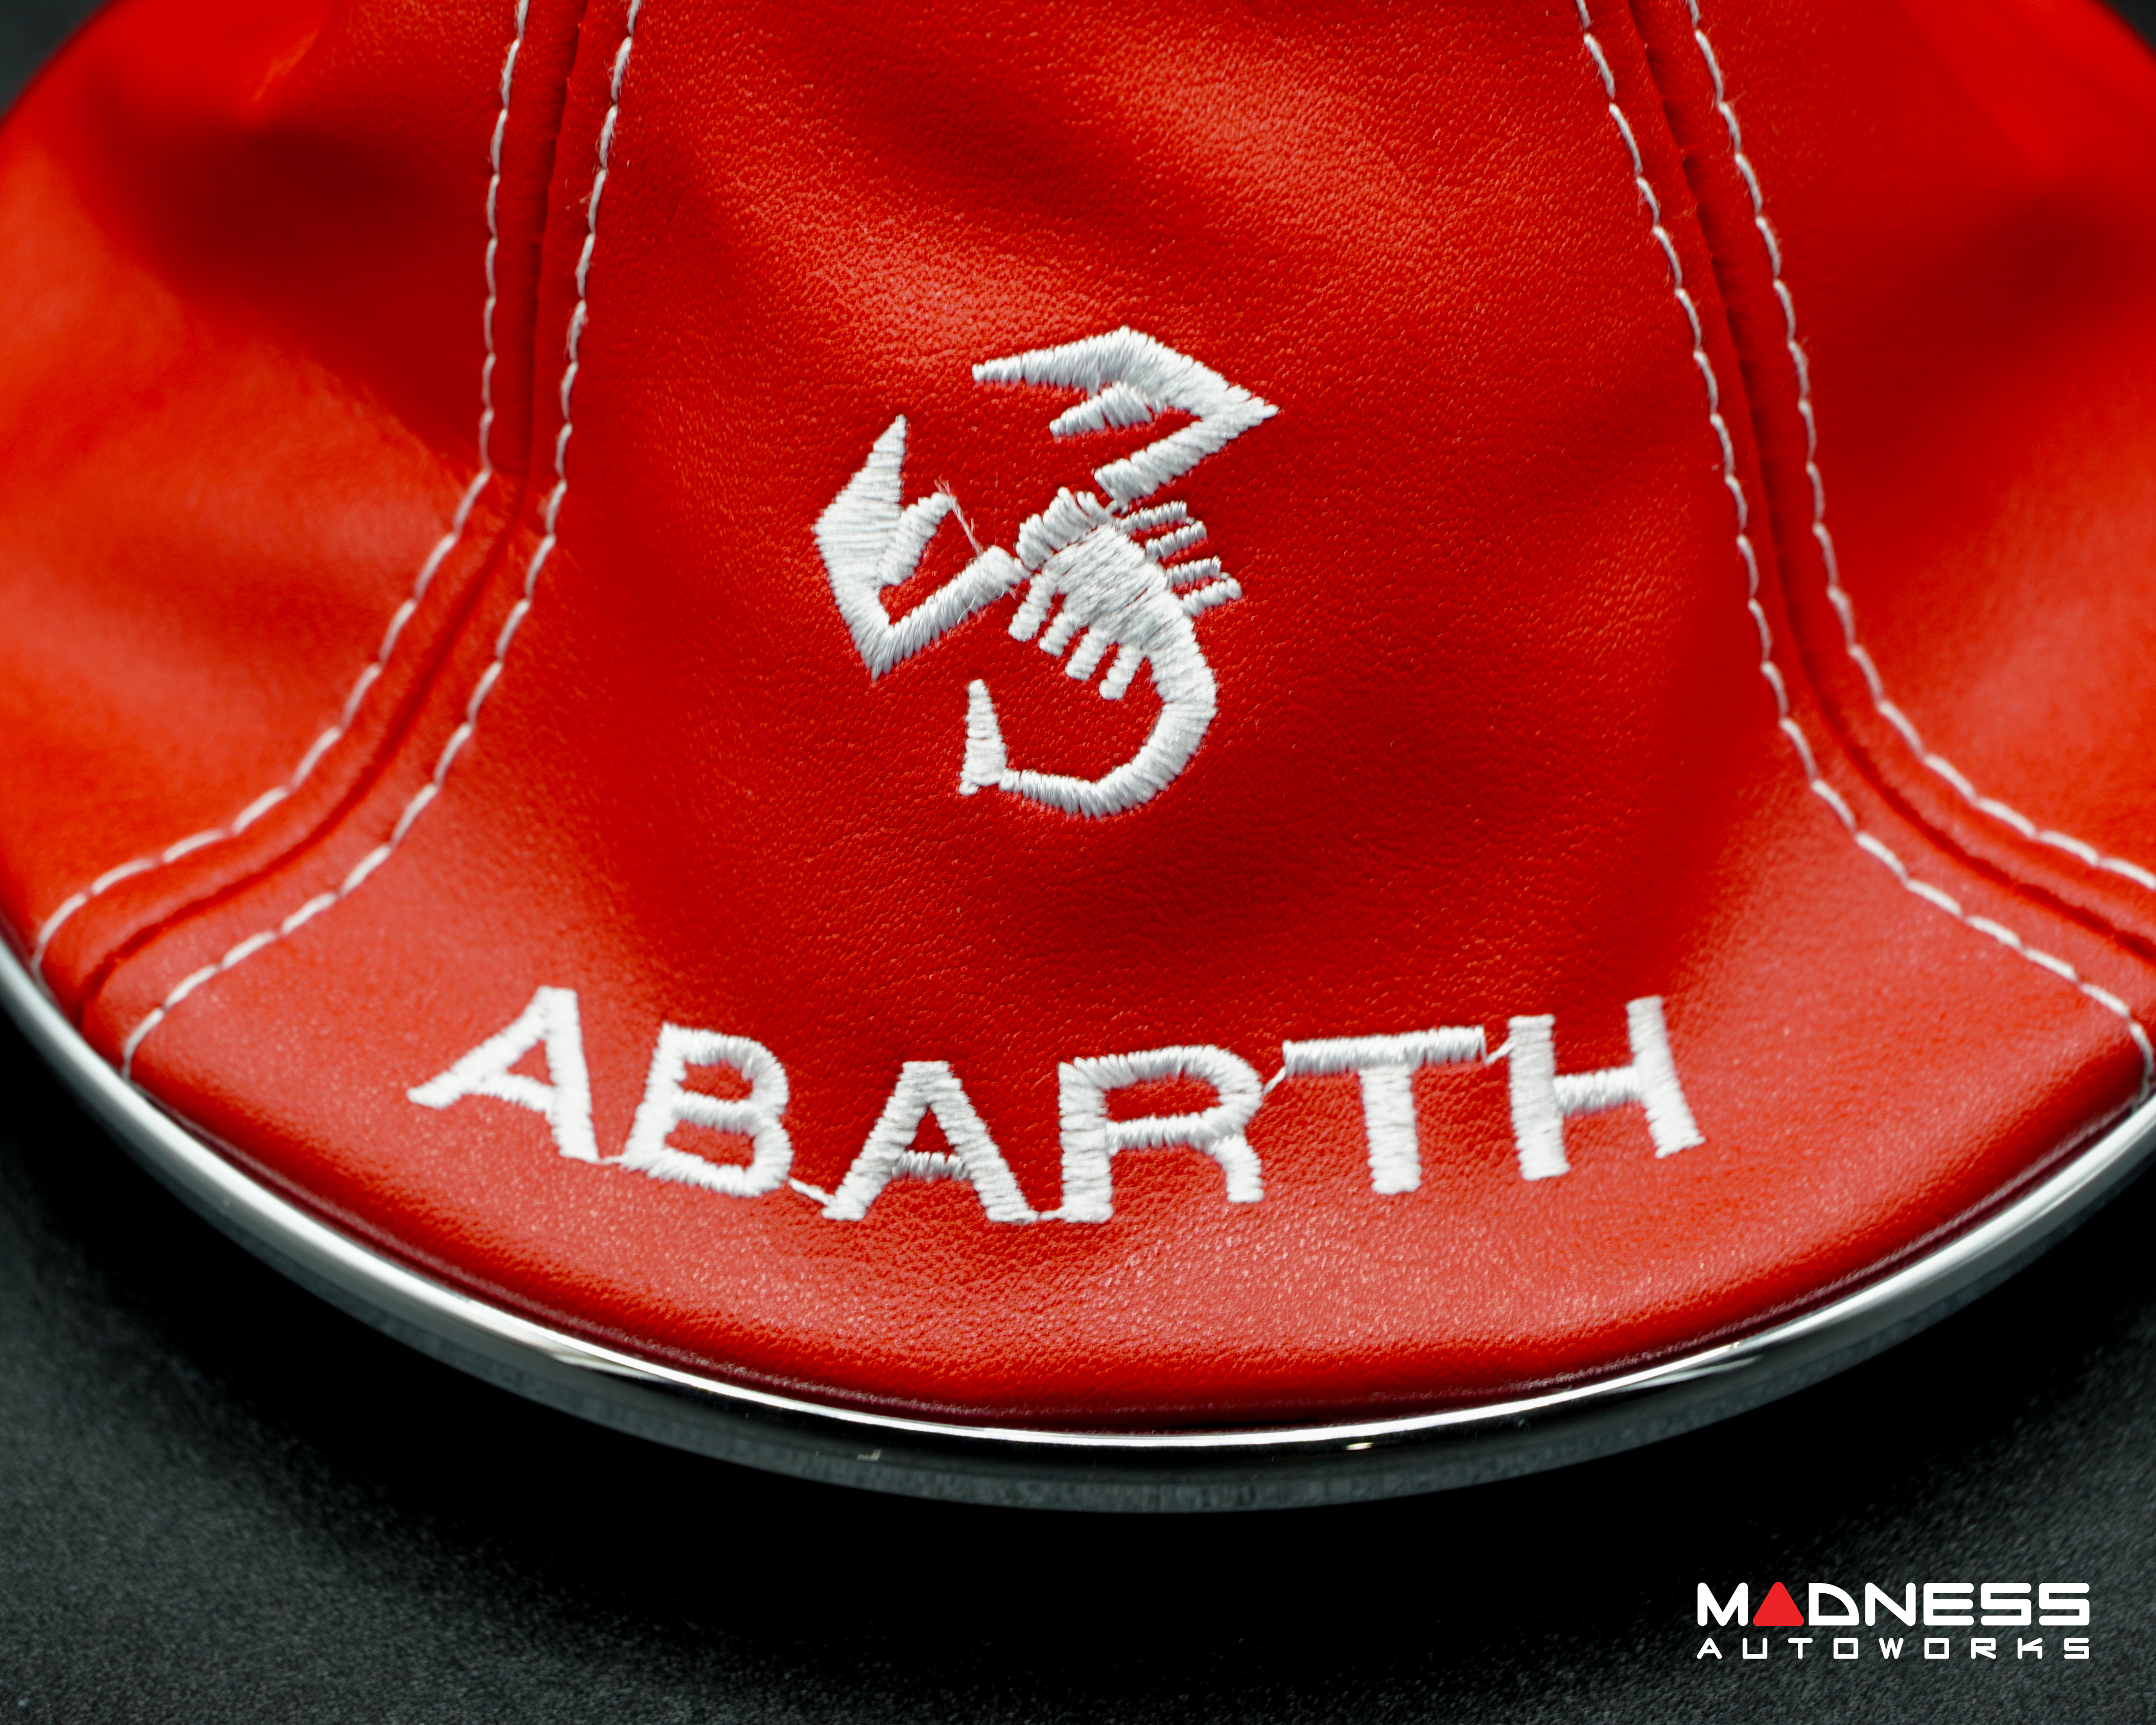 FIAT 500 Gear Shift Boot + Retaining Ring Set- Red EcoLeather w/ White Stitching + ABARTH/ Scorpion Logos